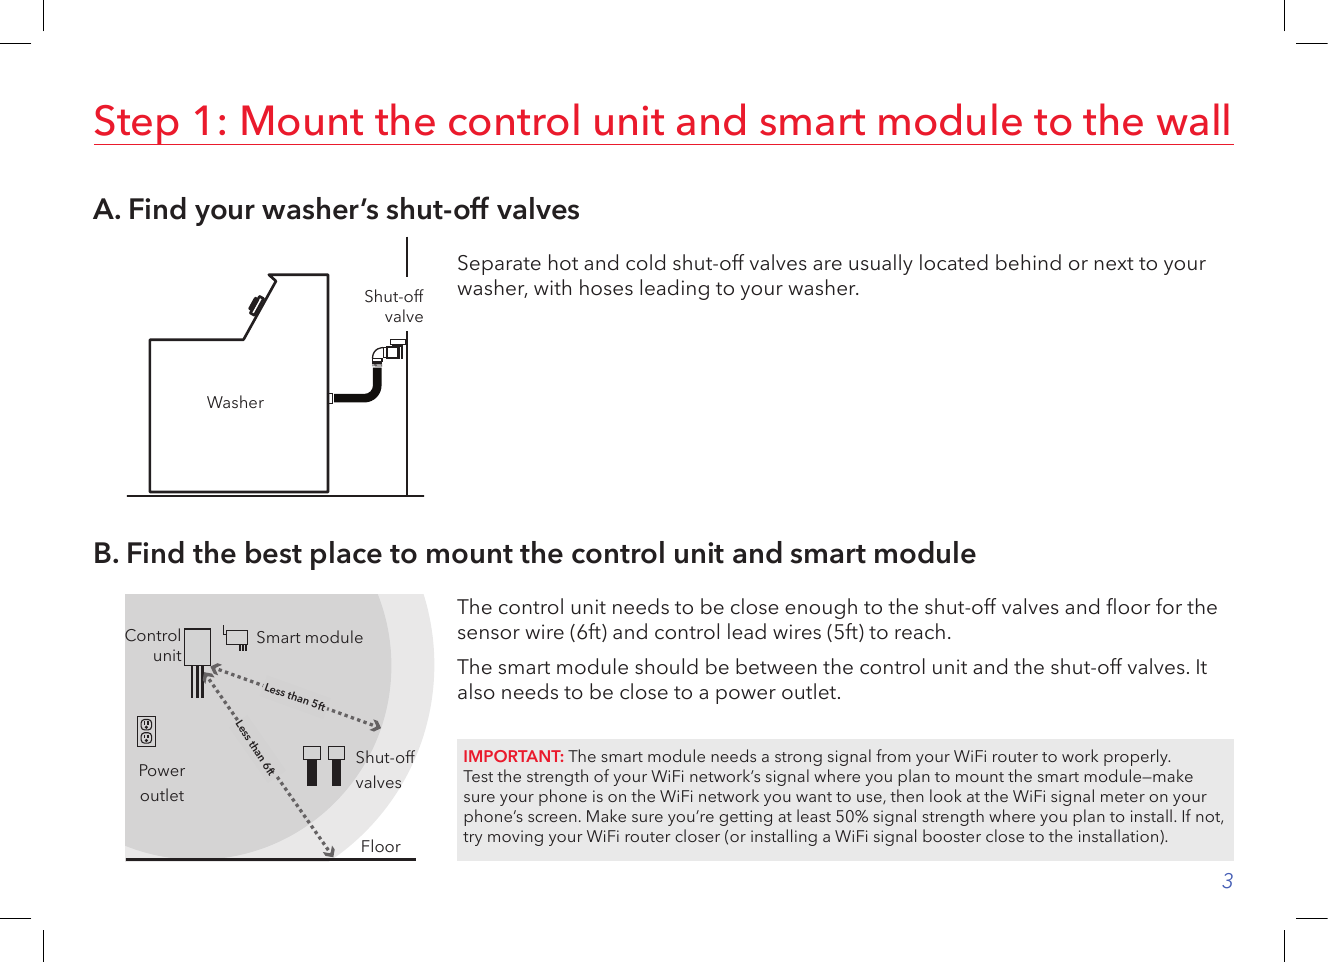 3A. Find your washer’s shut-off valvesStep 1: Mount the control unit and smart module to the wallSeparate hot and cold shut-off valves are usually located behind or next to your washer, with hoses leading to your washer.WasherShut-off valveB. Find the best place to mount the control unit and smart moduleThe control unit needs to be close enough to the shut-off valves and oor for the sensor wire (6ft) and control lead wires (5ft) to reach. The smart module should be between the control unit and the shut-off valves. It also needs to be close to a power outlet.Less than 5ftLess than 6ftControl unitFloorShut-off valvesPower outletSmart moduleIMPORTANT: The smart module needs a strong signal from your WiFi router to work properly. Test the strength of your WiFi network’s signal where you plan to mount the smart module—make sure your phone is on the WiFi network you want to use, then look at the WiFi signal meter on your phone’s screen. Make sure you’re getting at least 50% signal strength where you plan to install. If not, try moving your WiFi router closer (or installing a WiFi signal booster close to the installation).